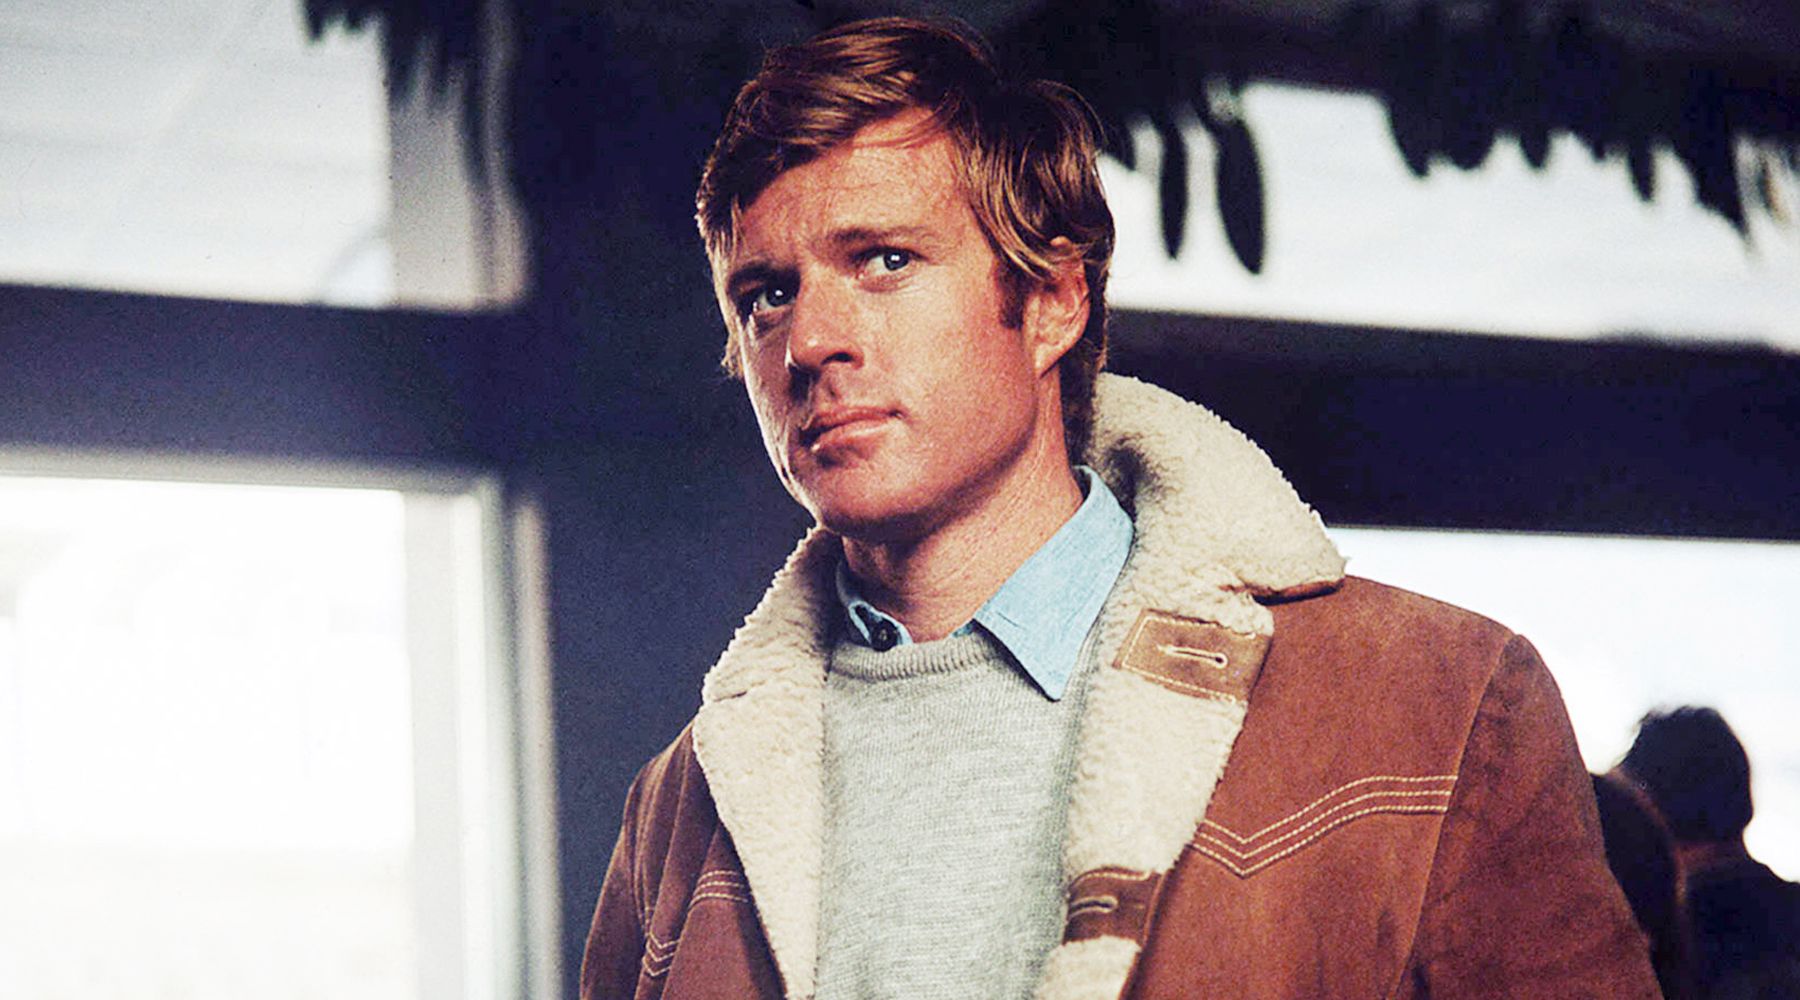 10 Questions for Robert Redford - 10 Questions - TIME